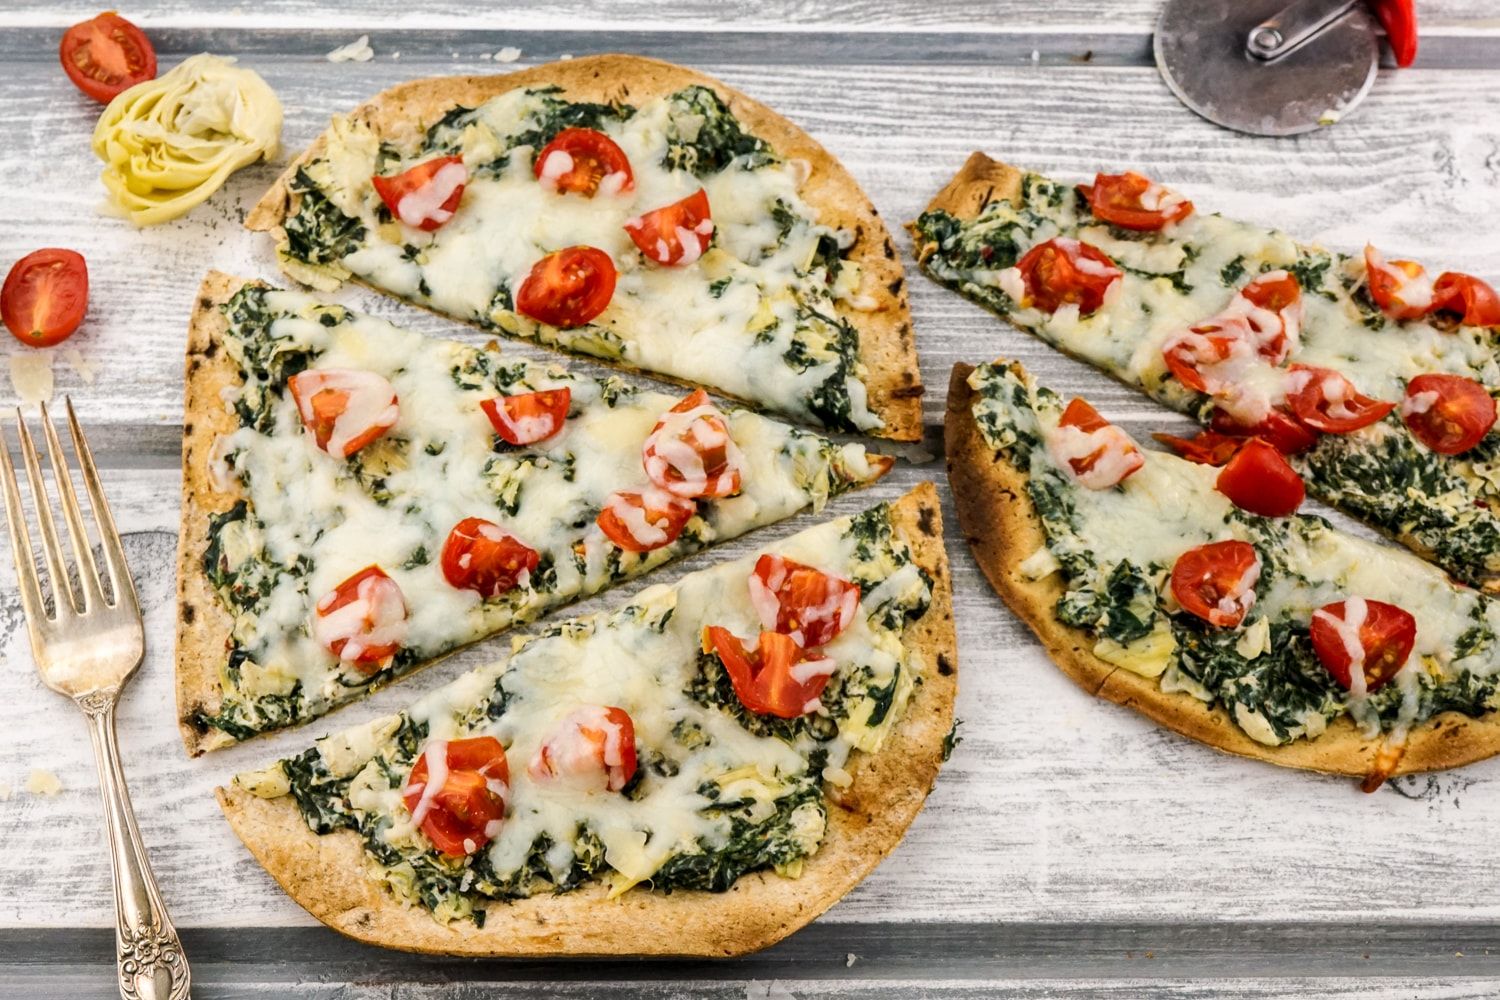 Spinach Artichoke Pizza on a thin flatbread with tomatoes.